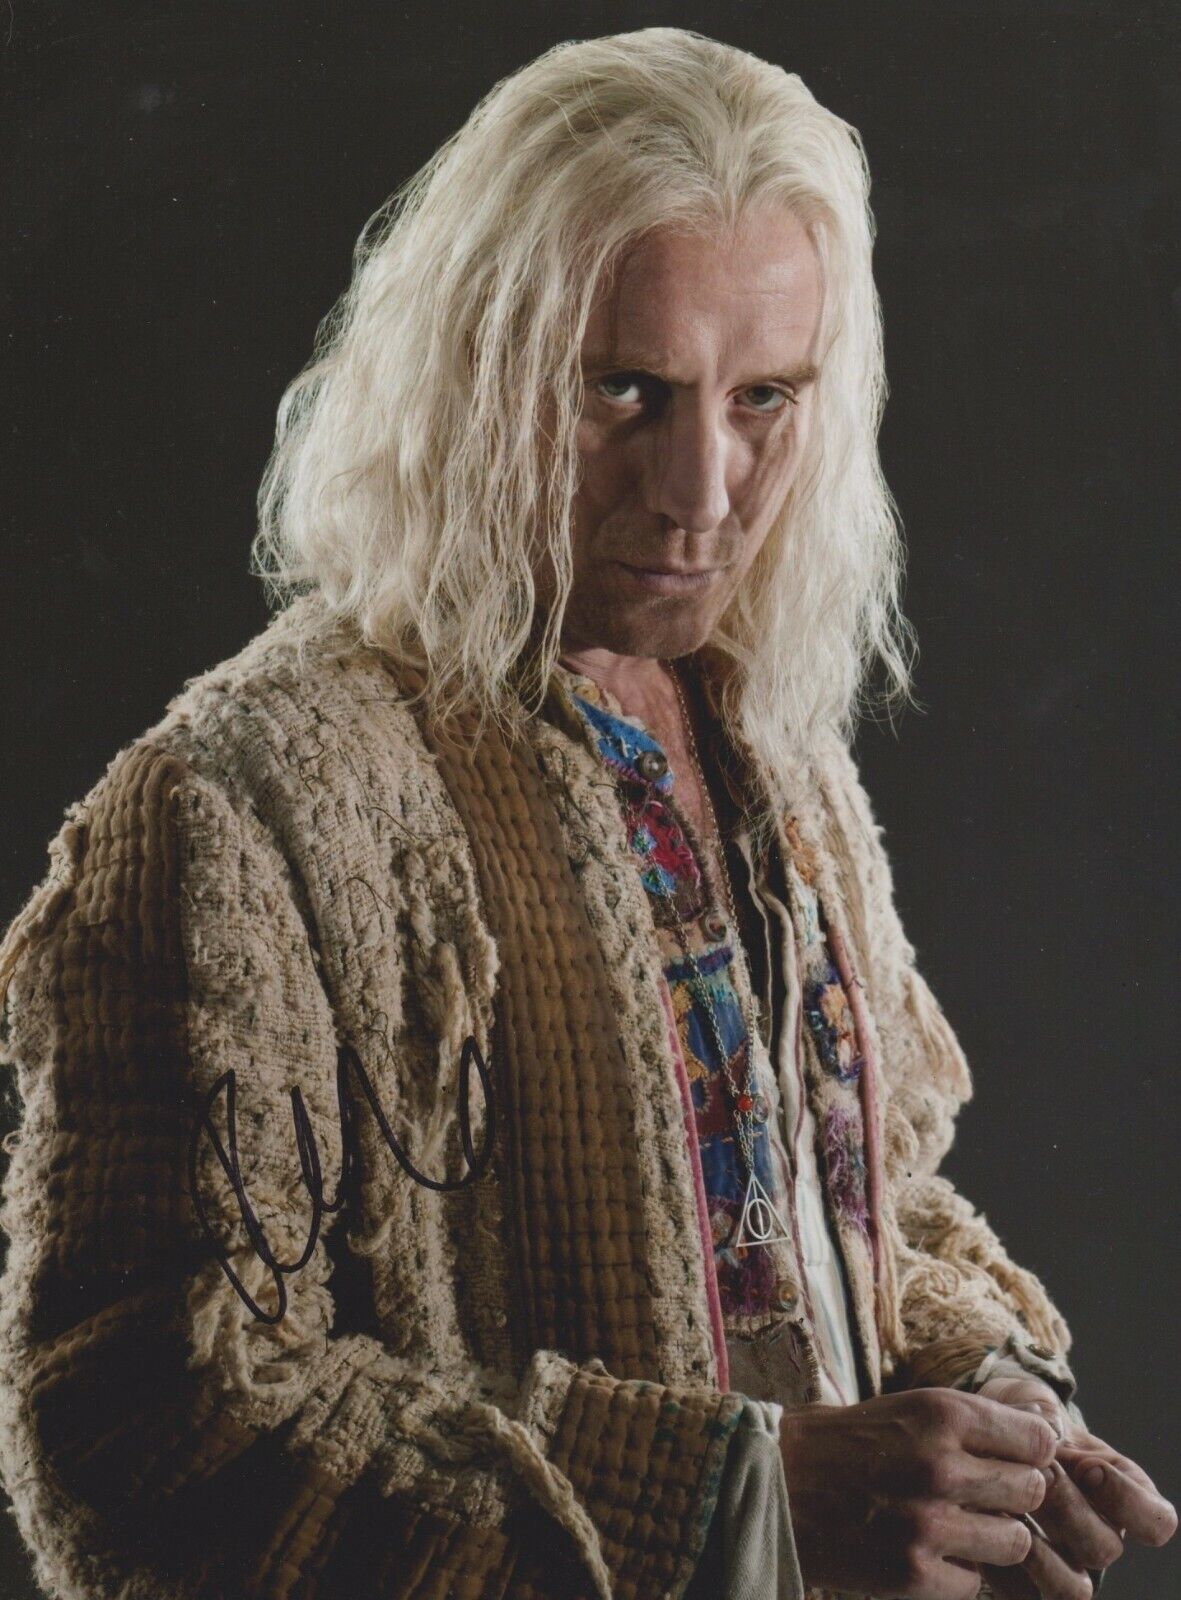 Rhys Ifans Signed Harry Potter 10x8 Photo Poster painting AFTAL